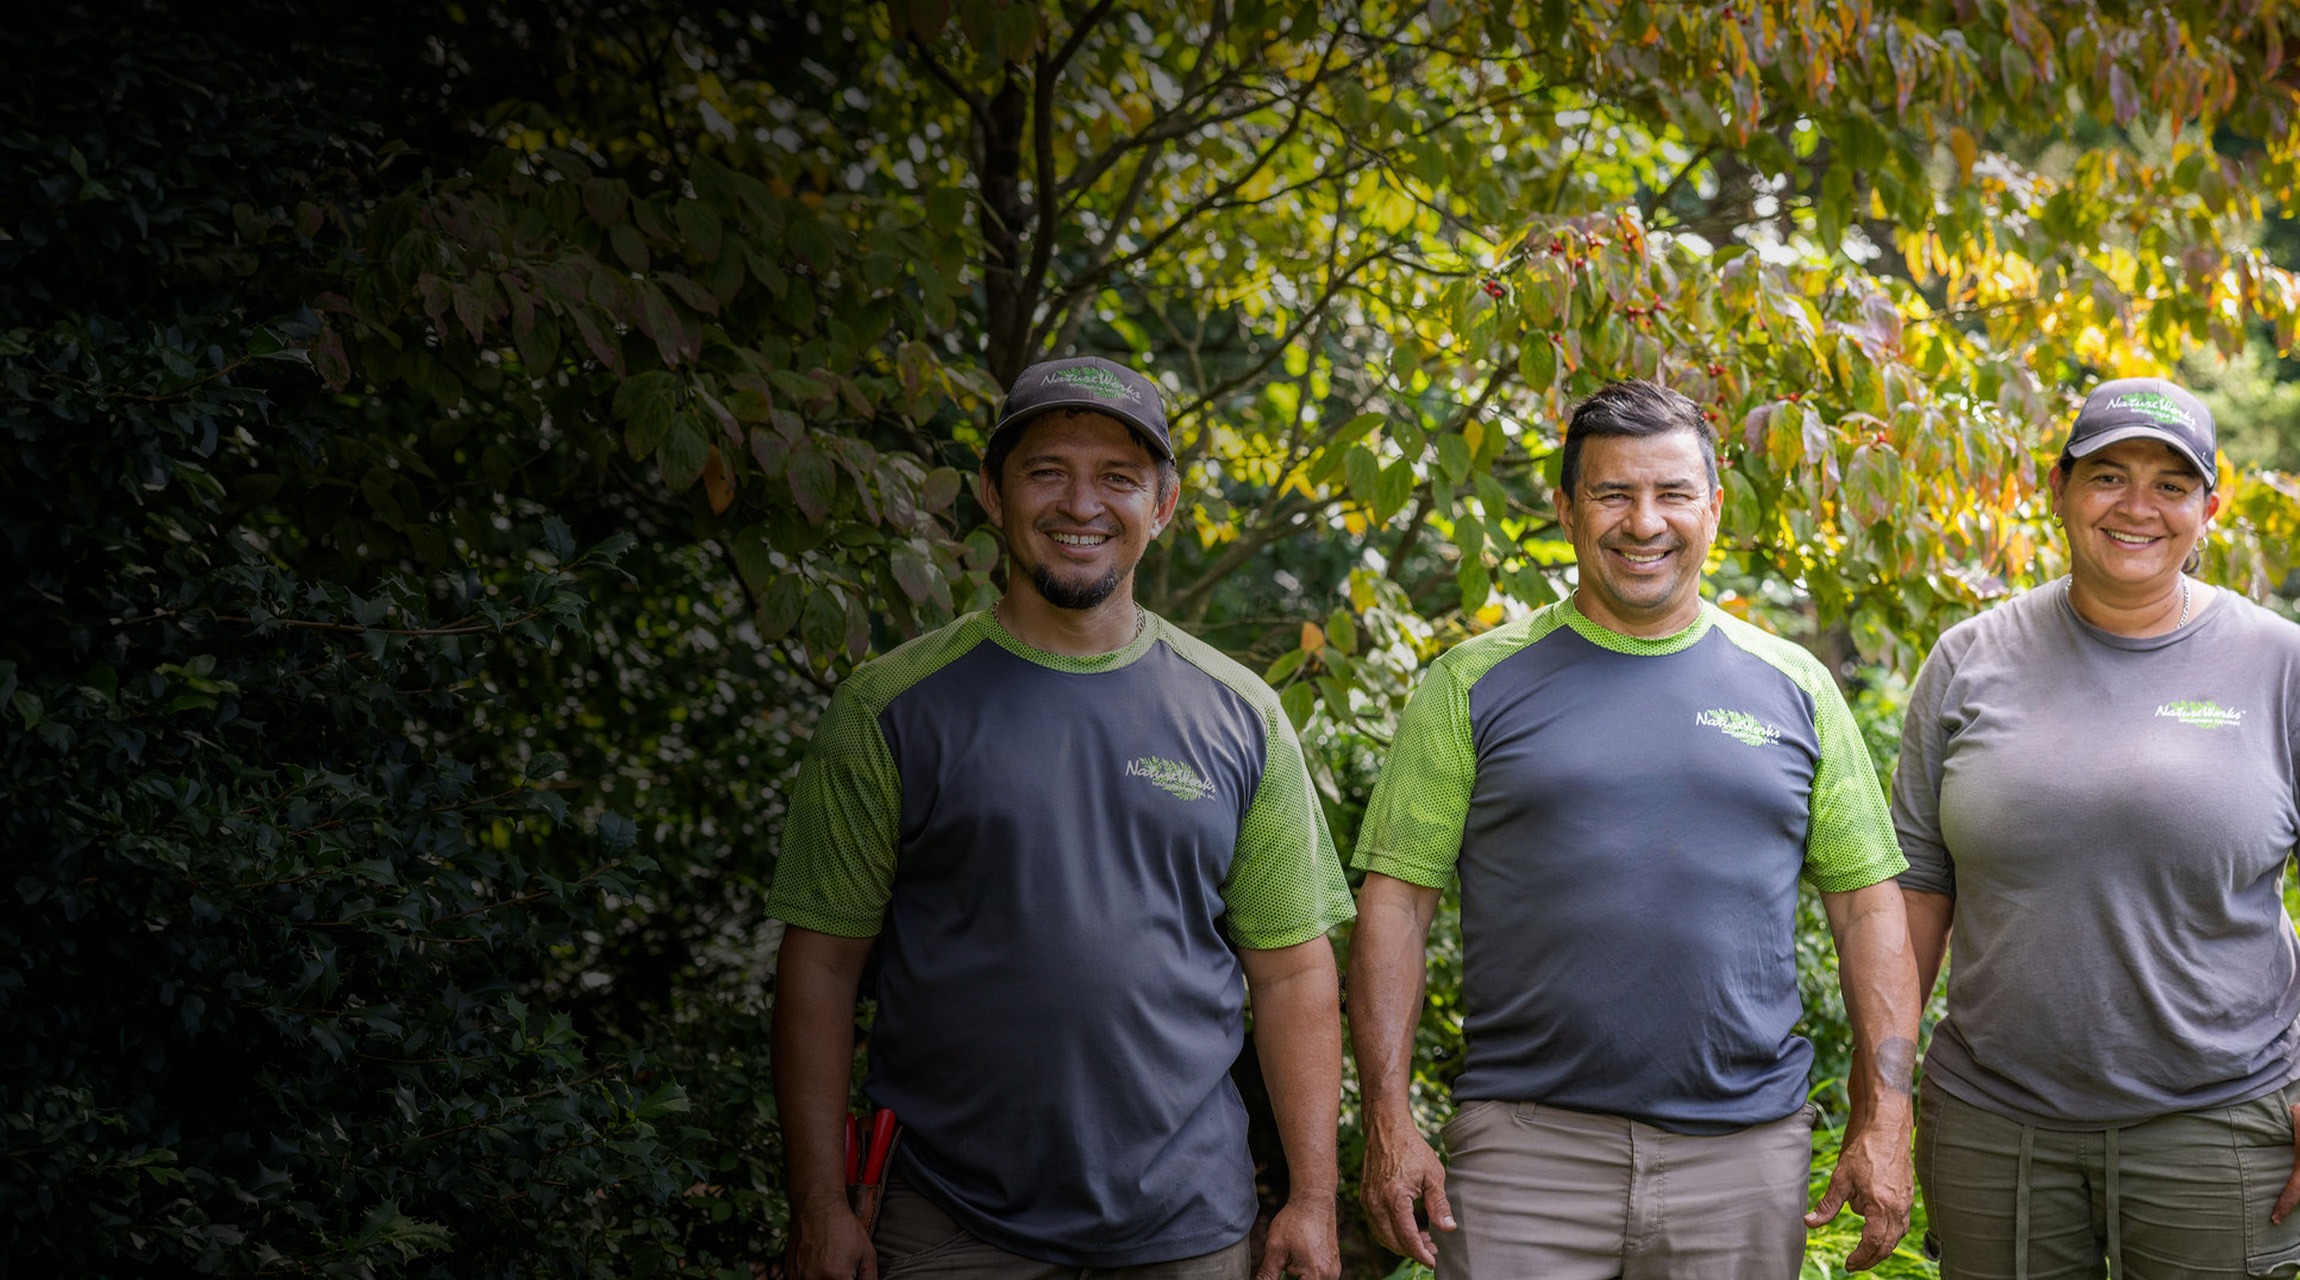 Three smiling people in matching green and gray uniforms stand in front of lush green foliage, possibly a team or coworkers outdoors.